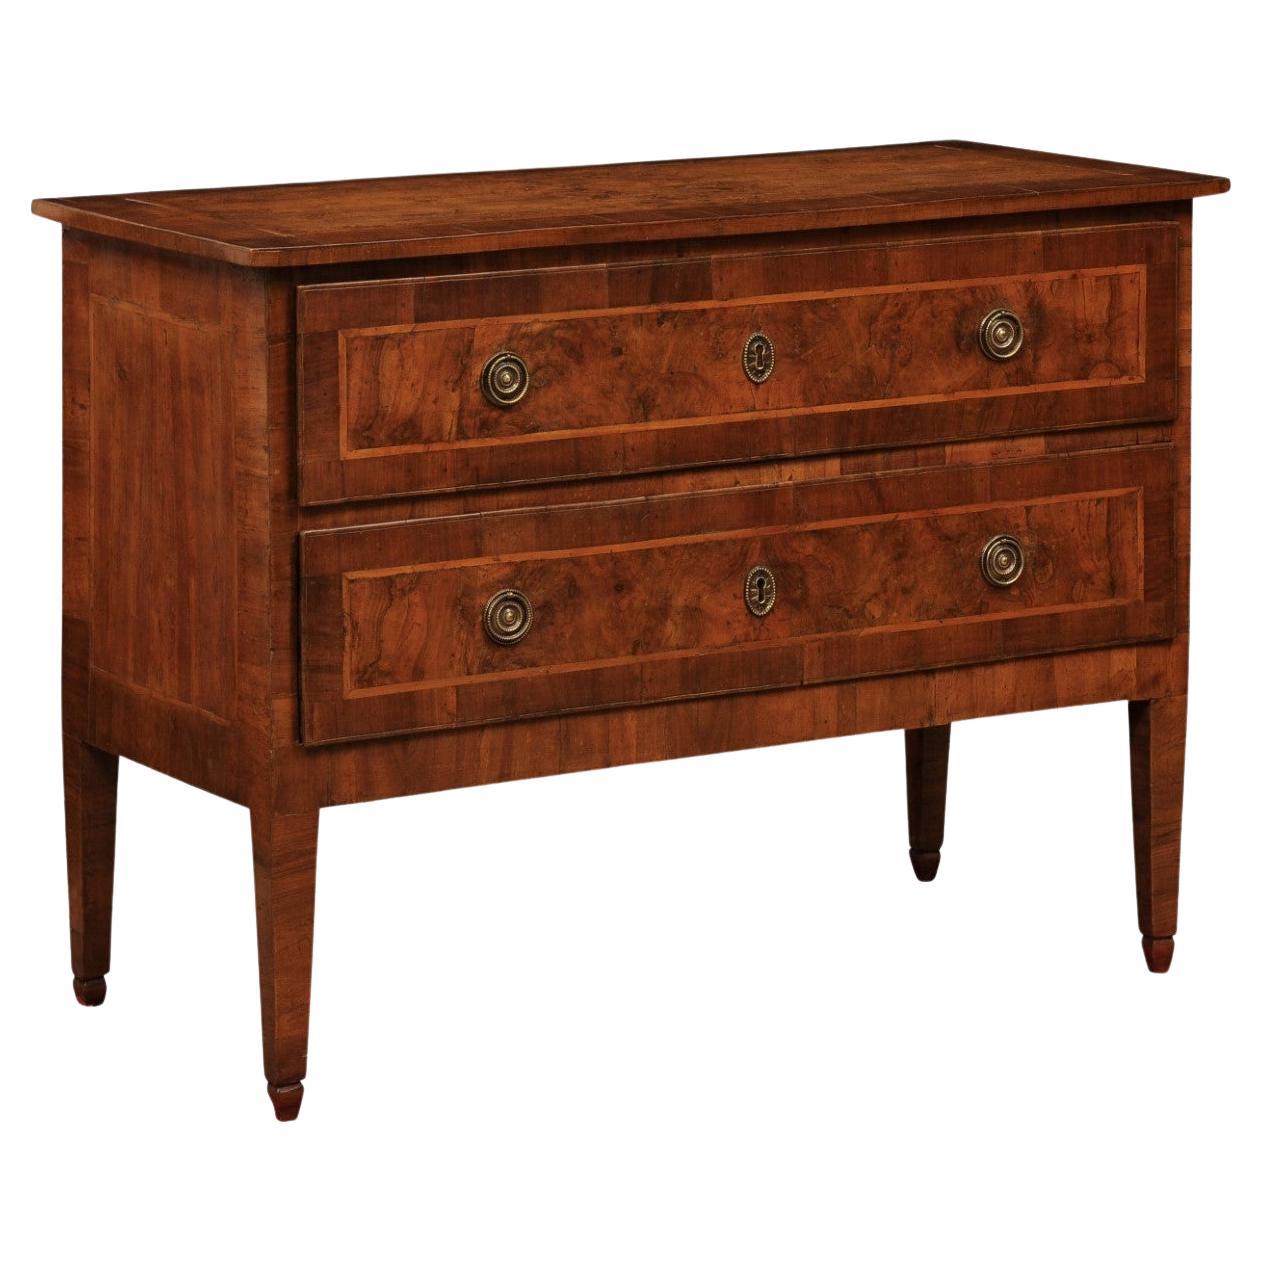 Late 18th Century Italian Walnut 2 Drawer Commode with Inlay, ca. 1790 For Sale